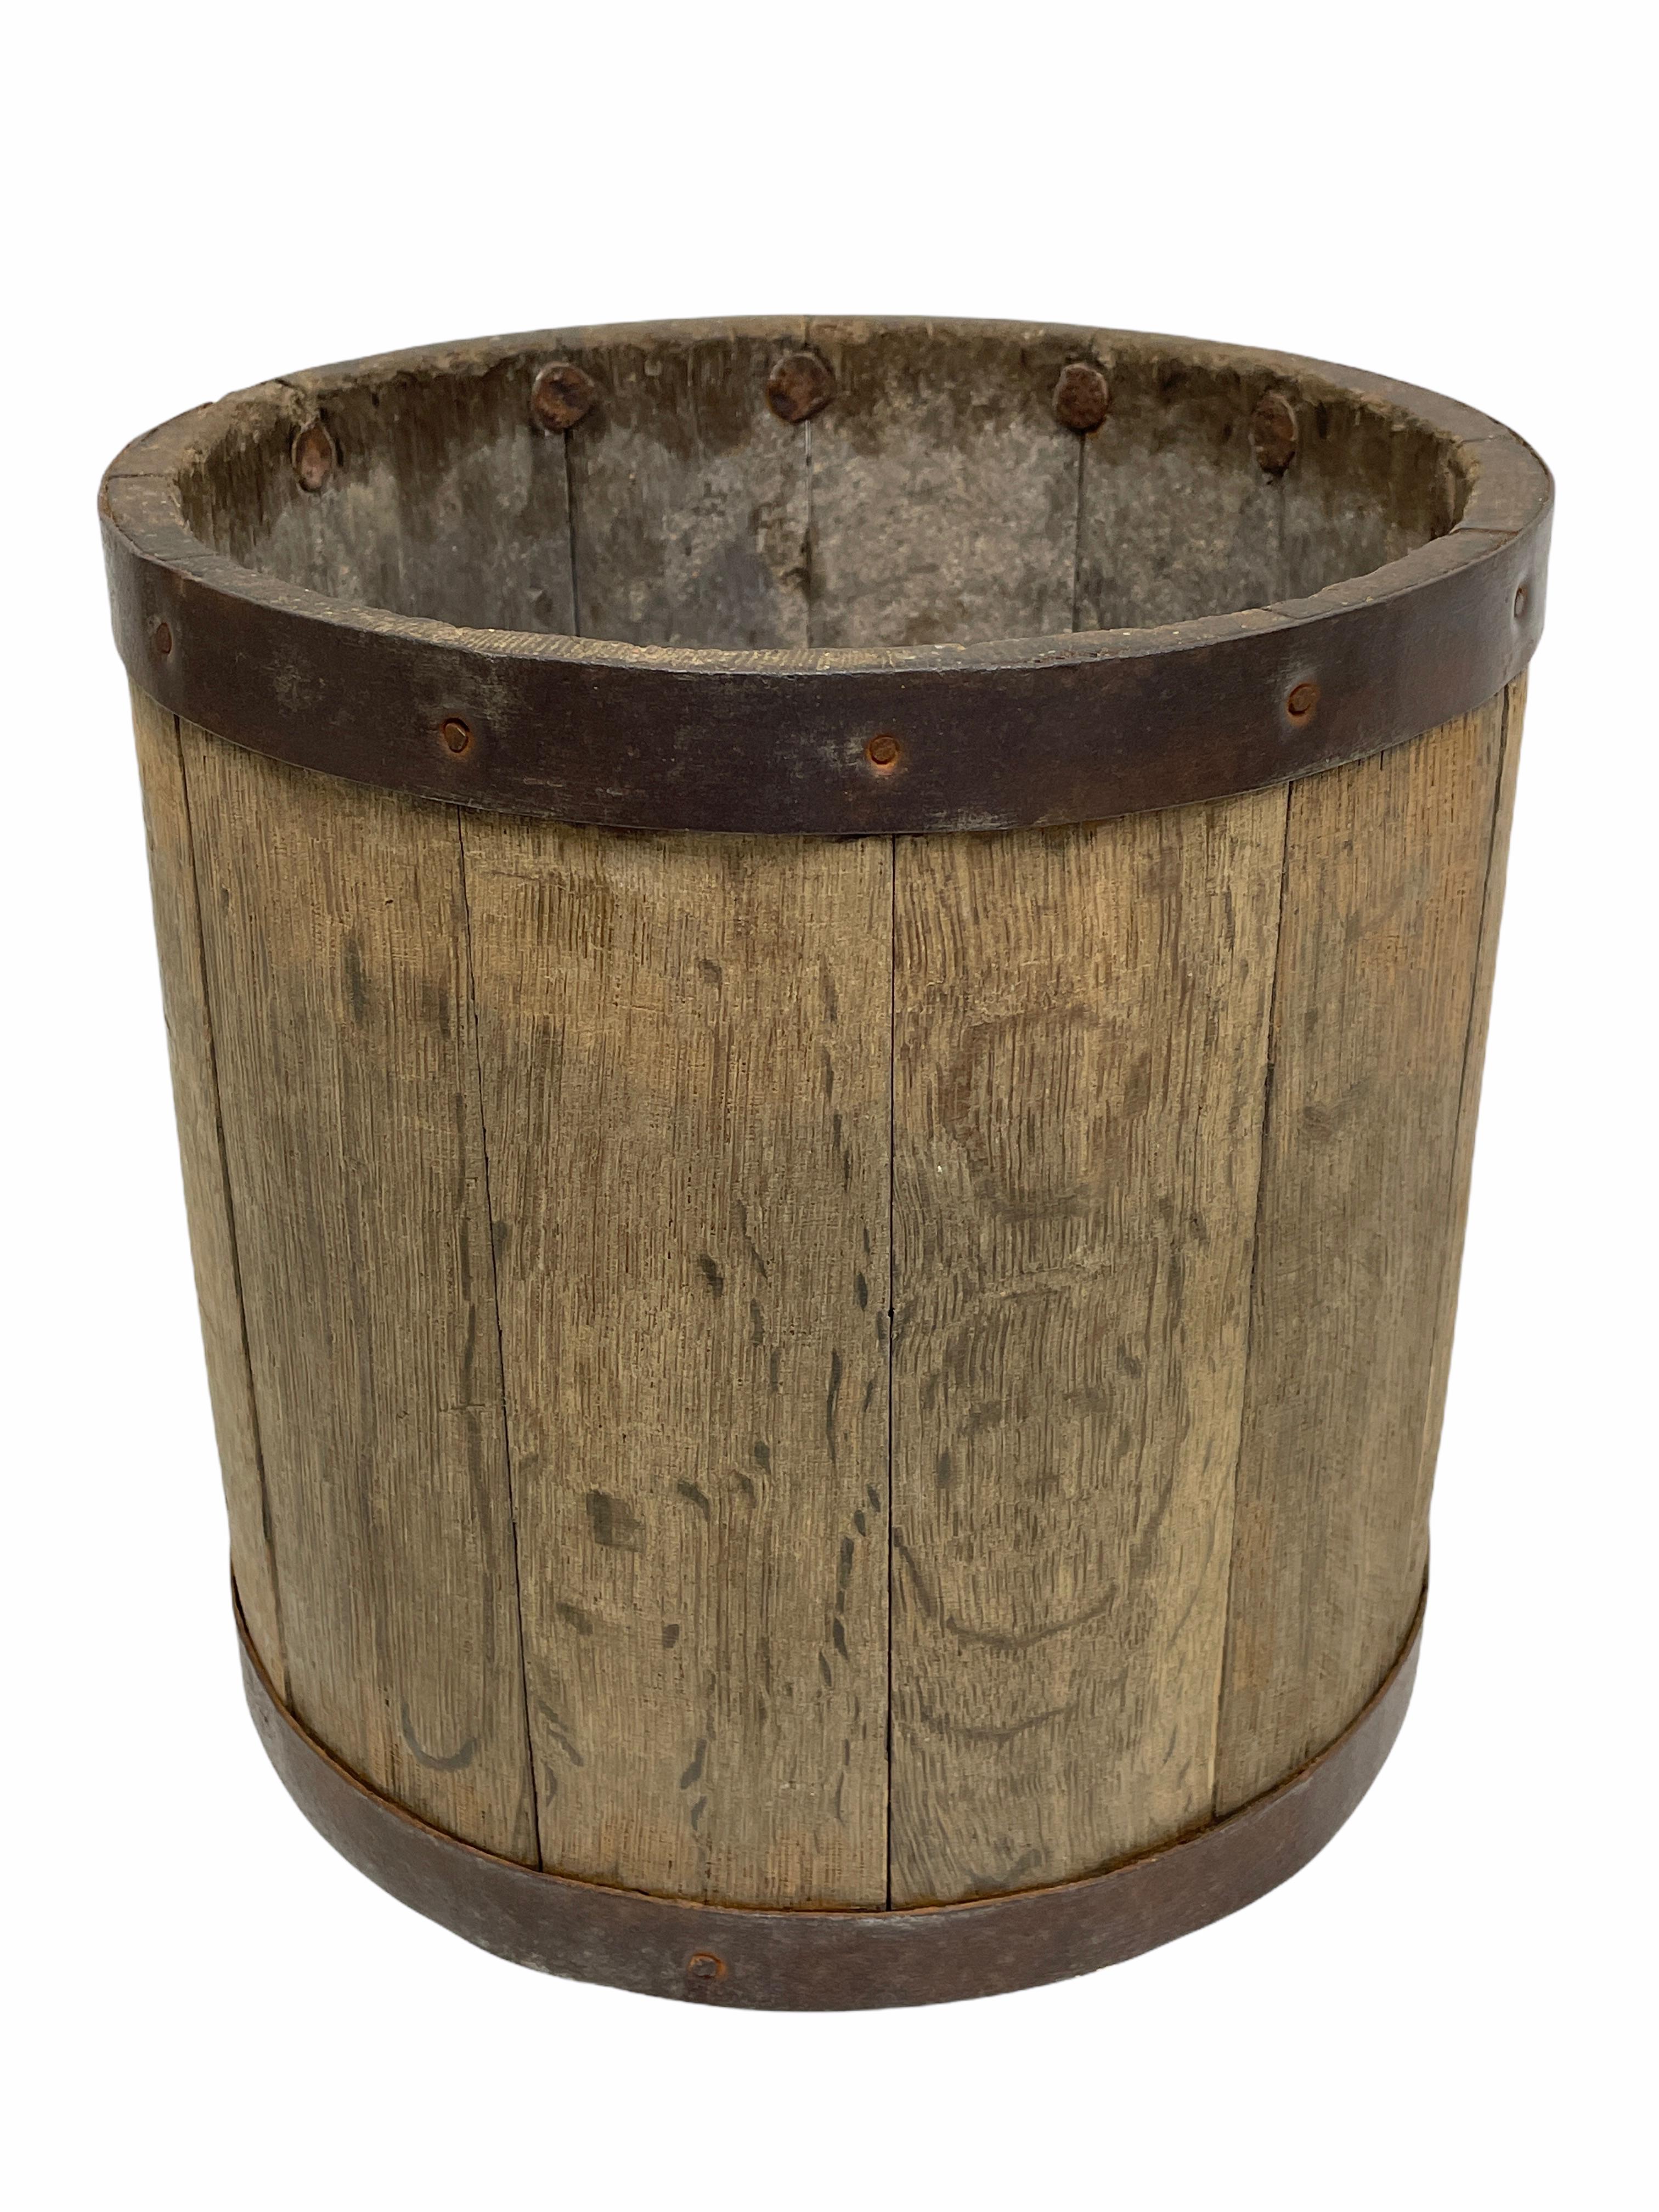 Folk Art Wood Water Bucket with Wrought Iron Bands, Austria, 1890s